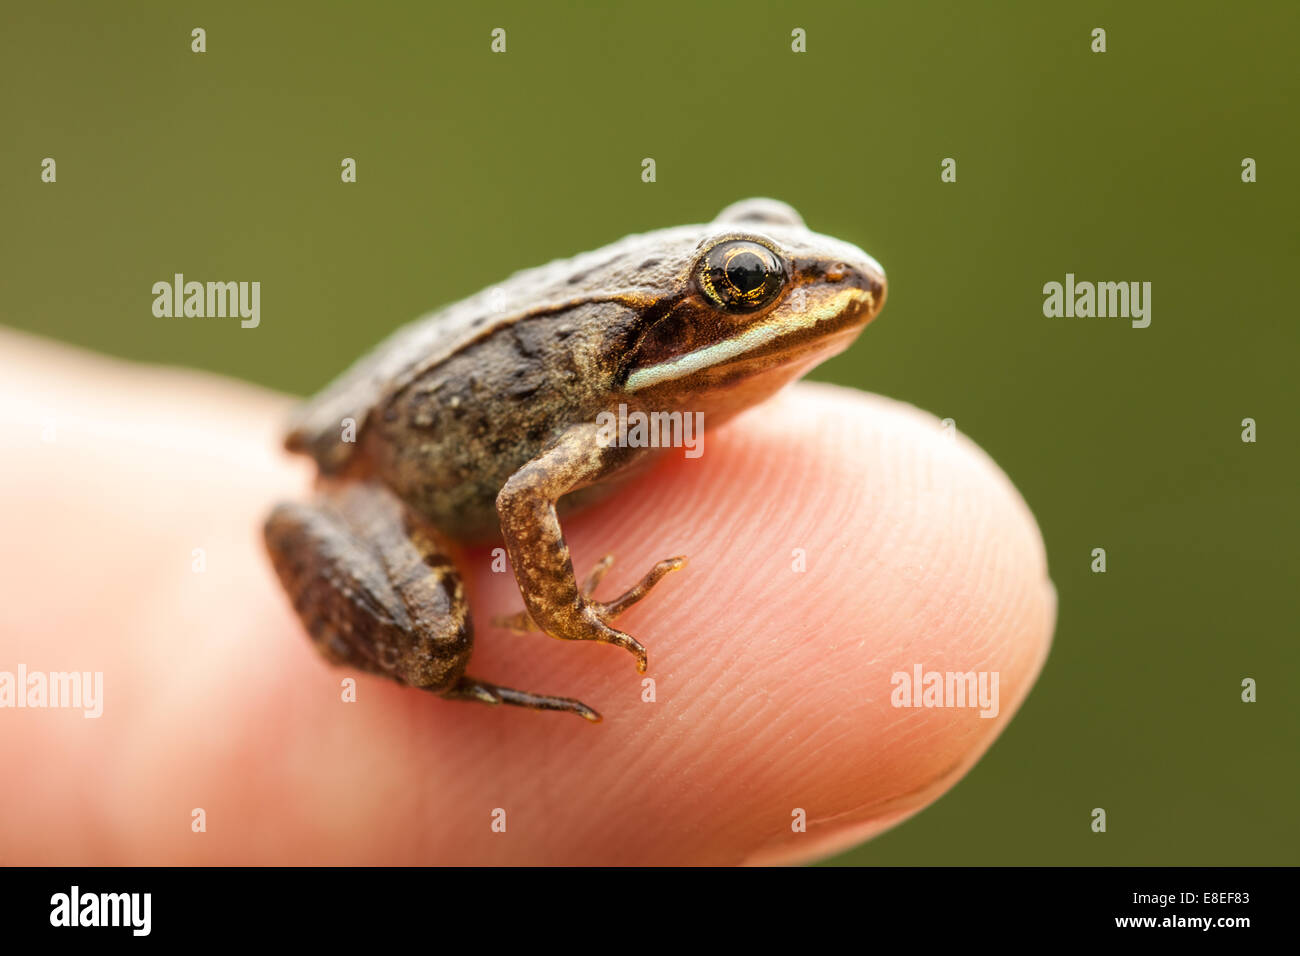 Miniature from sitting on a Humain Finger (index) so we can see how small the frog is Stock Photo